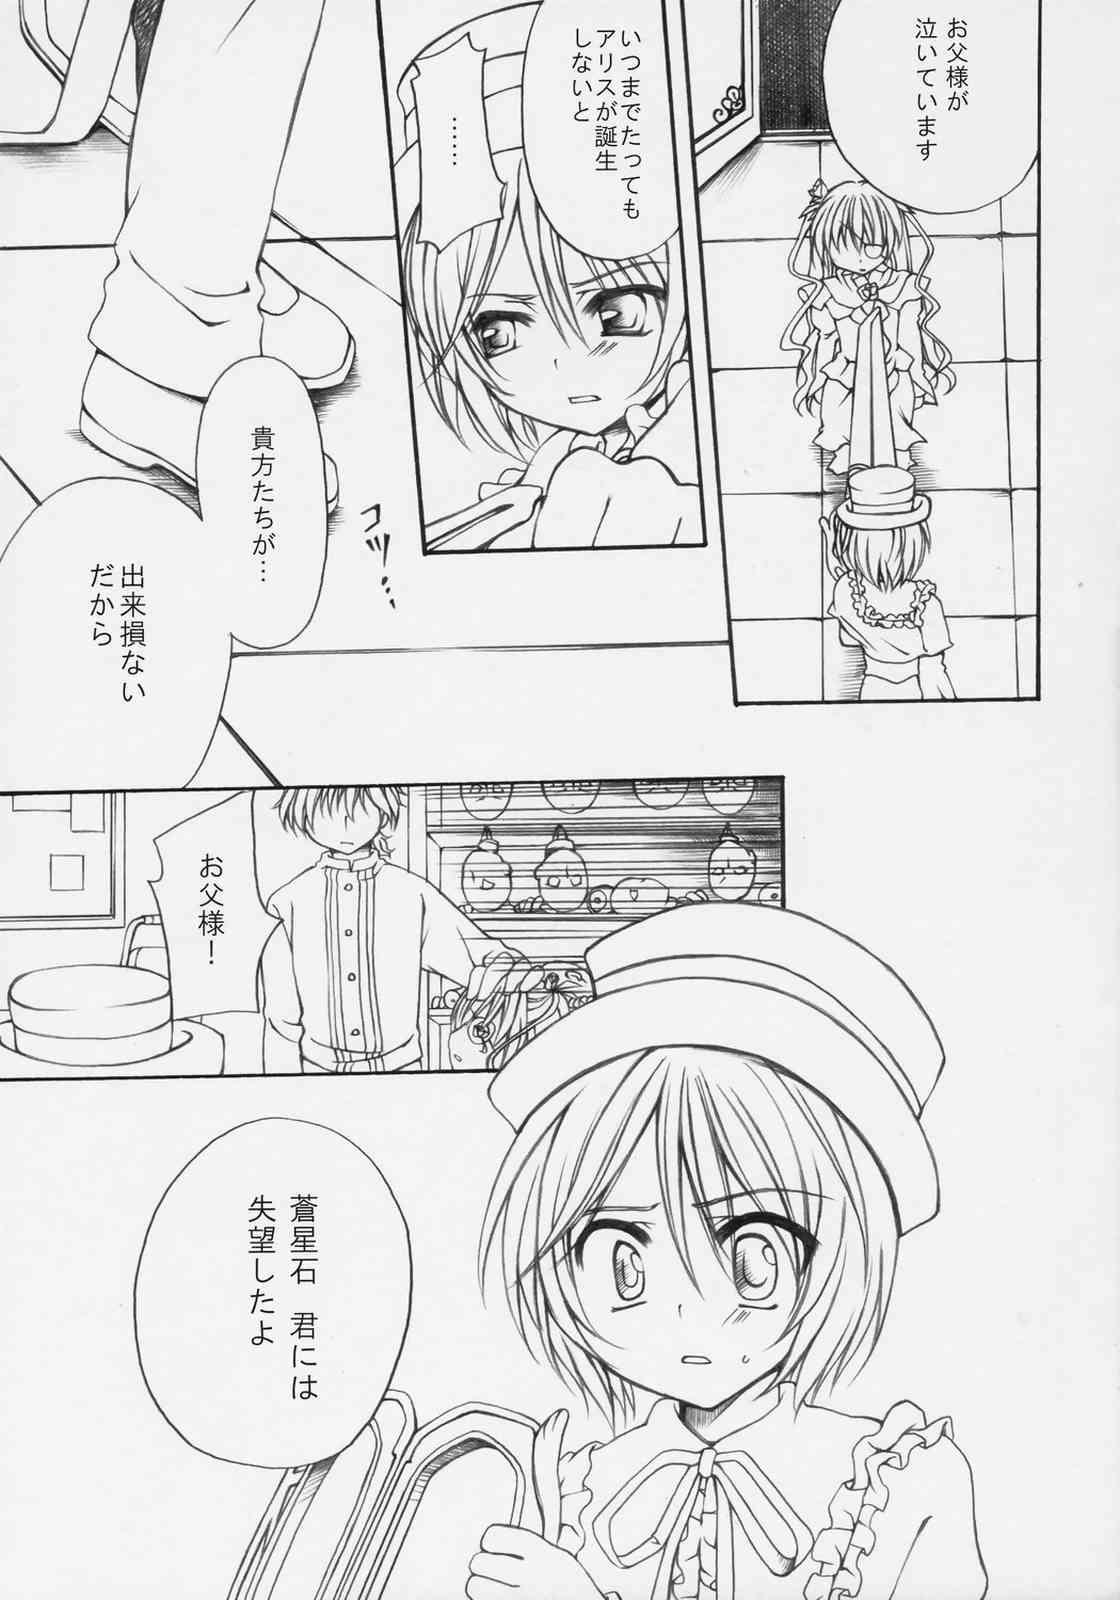 Cheating DANCING DOLL - Rozen maiden Spreading - Page 4